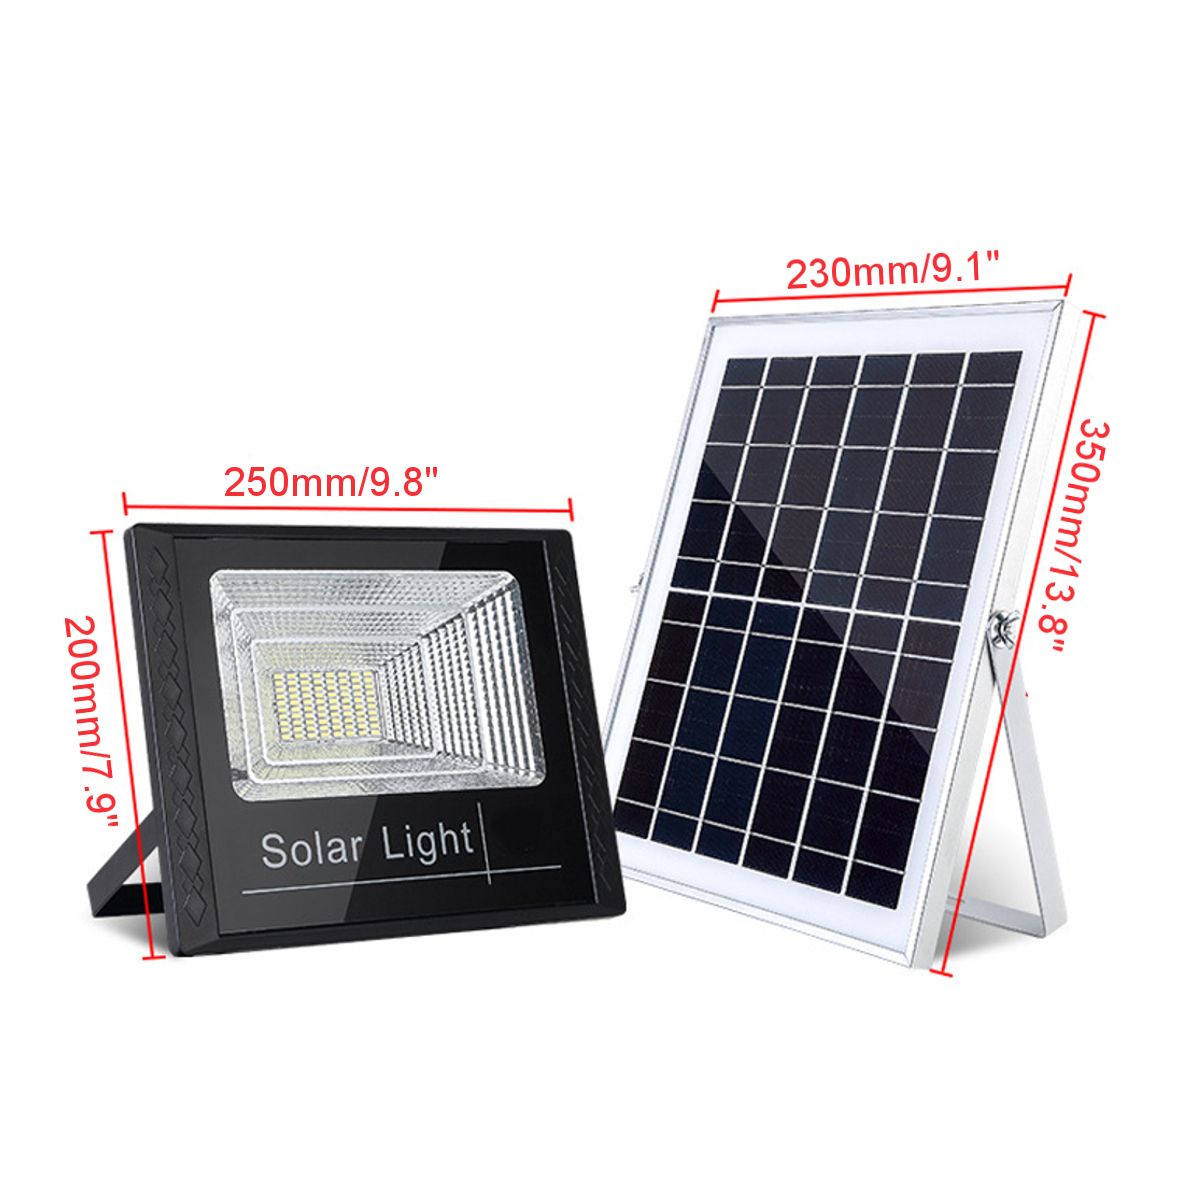 Motion-Sensor-Infrared-194LED-Solar-Wall-Light-Waterproof-Remnote-Control-Garden-Lamp-for-Home-Outdo-1769839